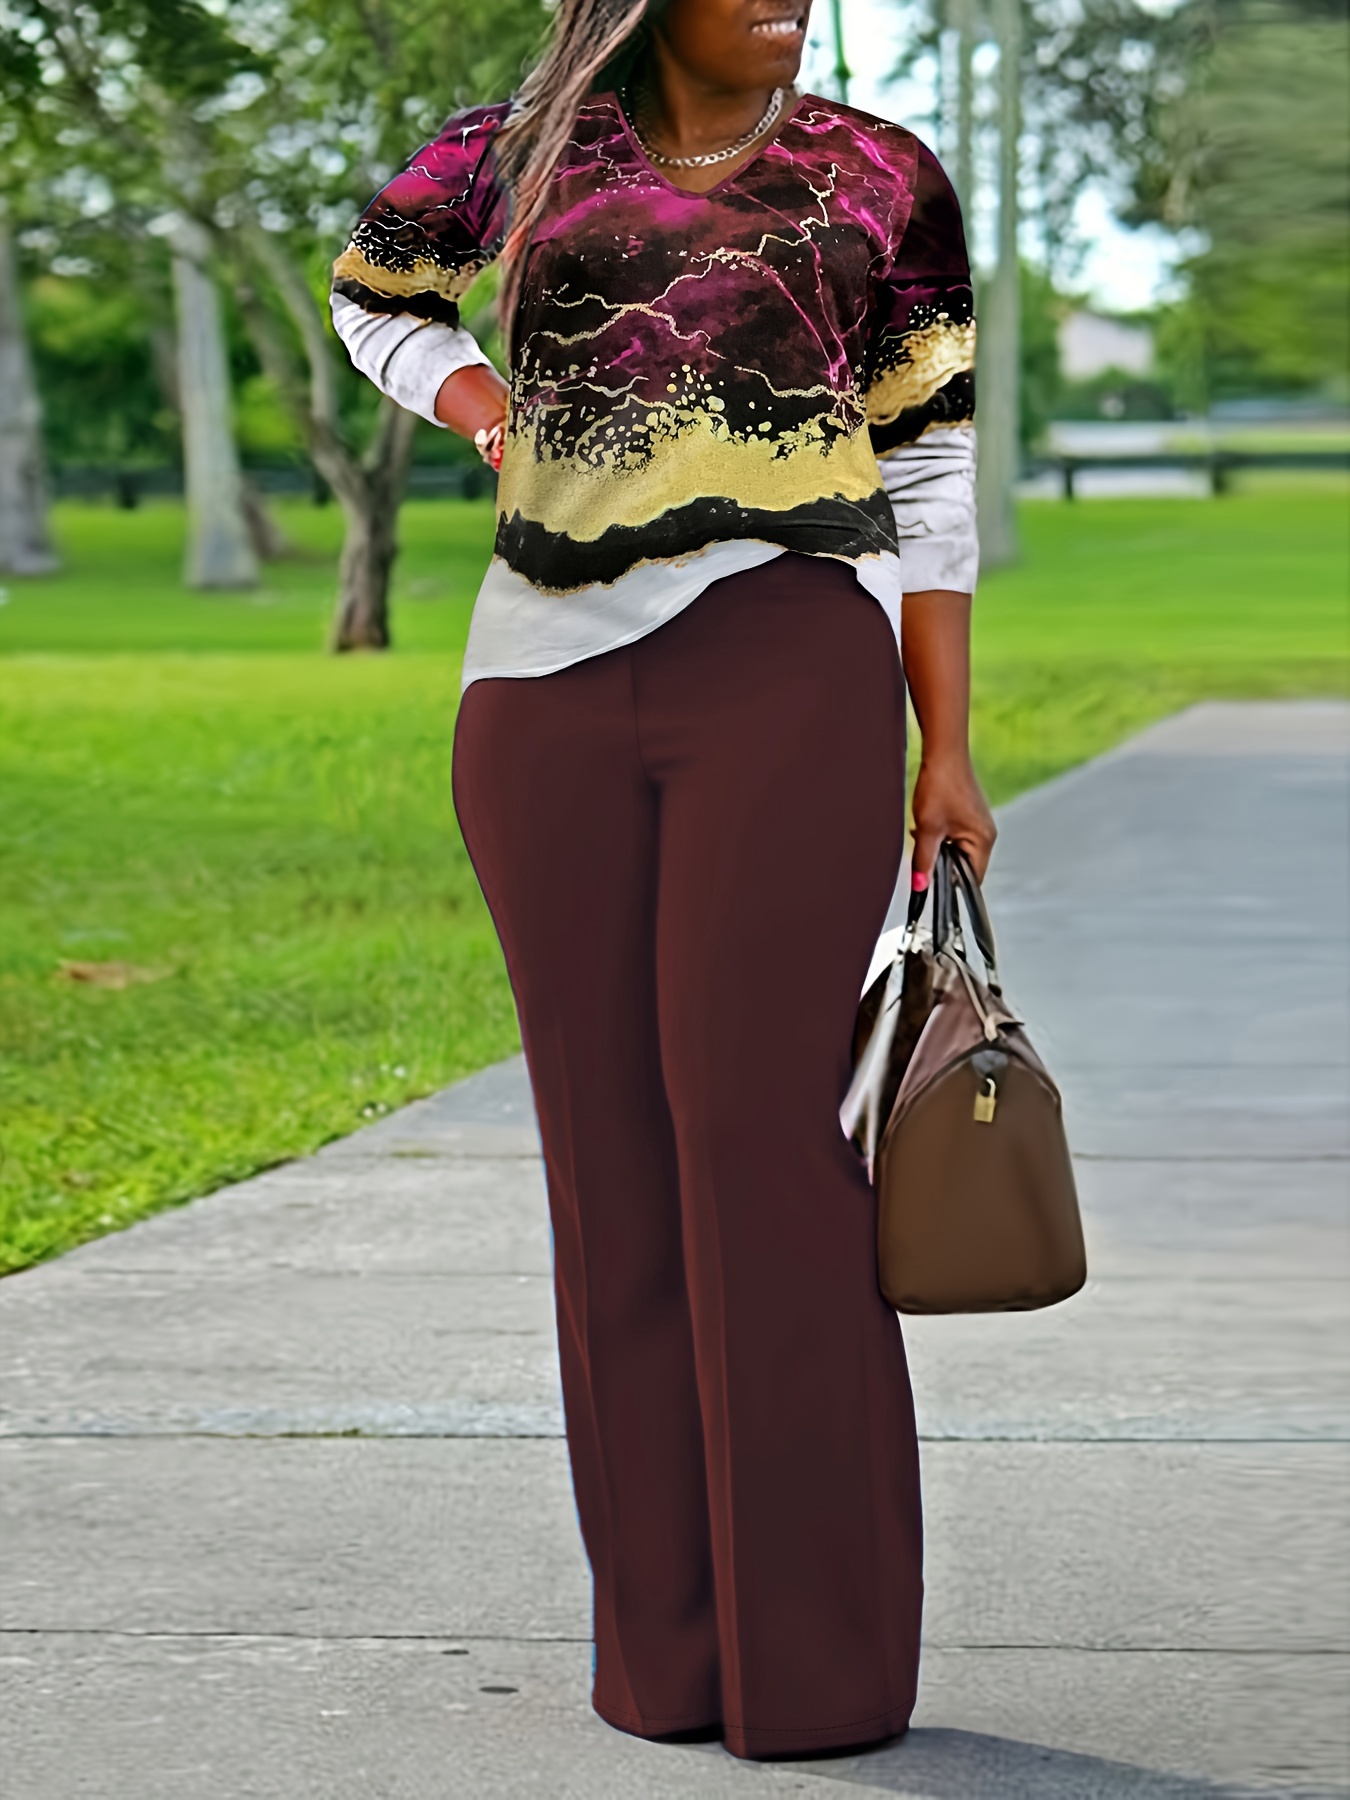 Palazzo Pants for Plus Size–24 Palazzo Outfit Ideas for Curvy